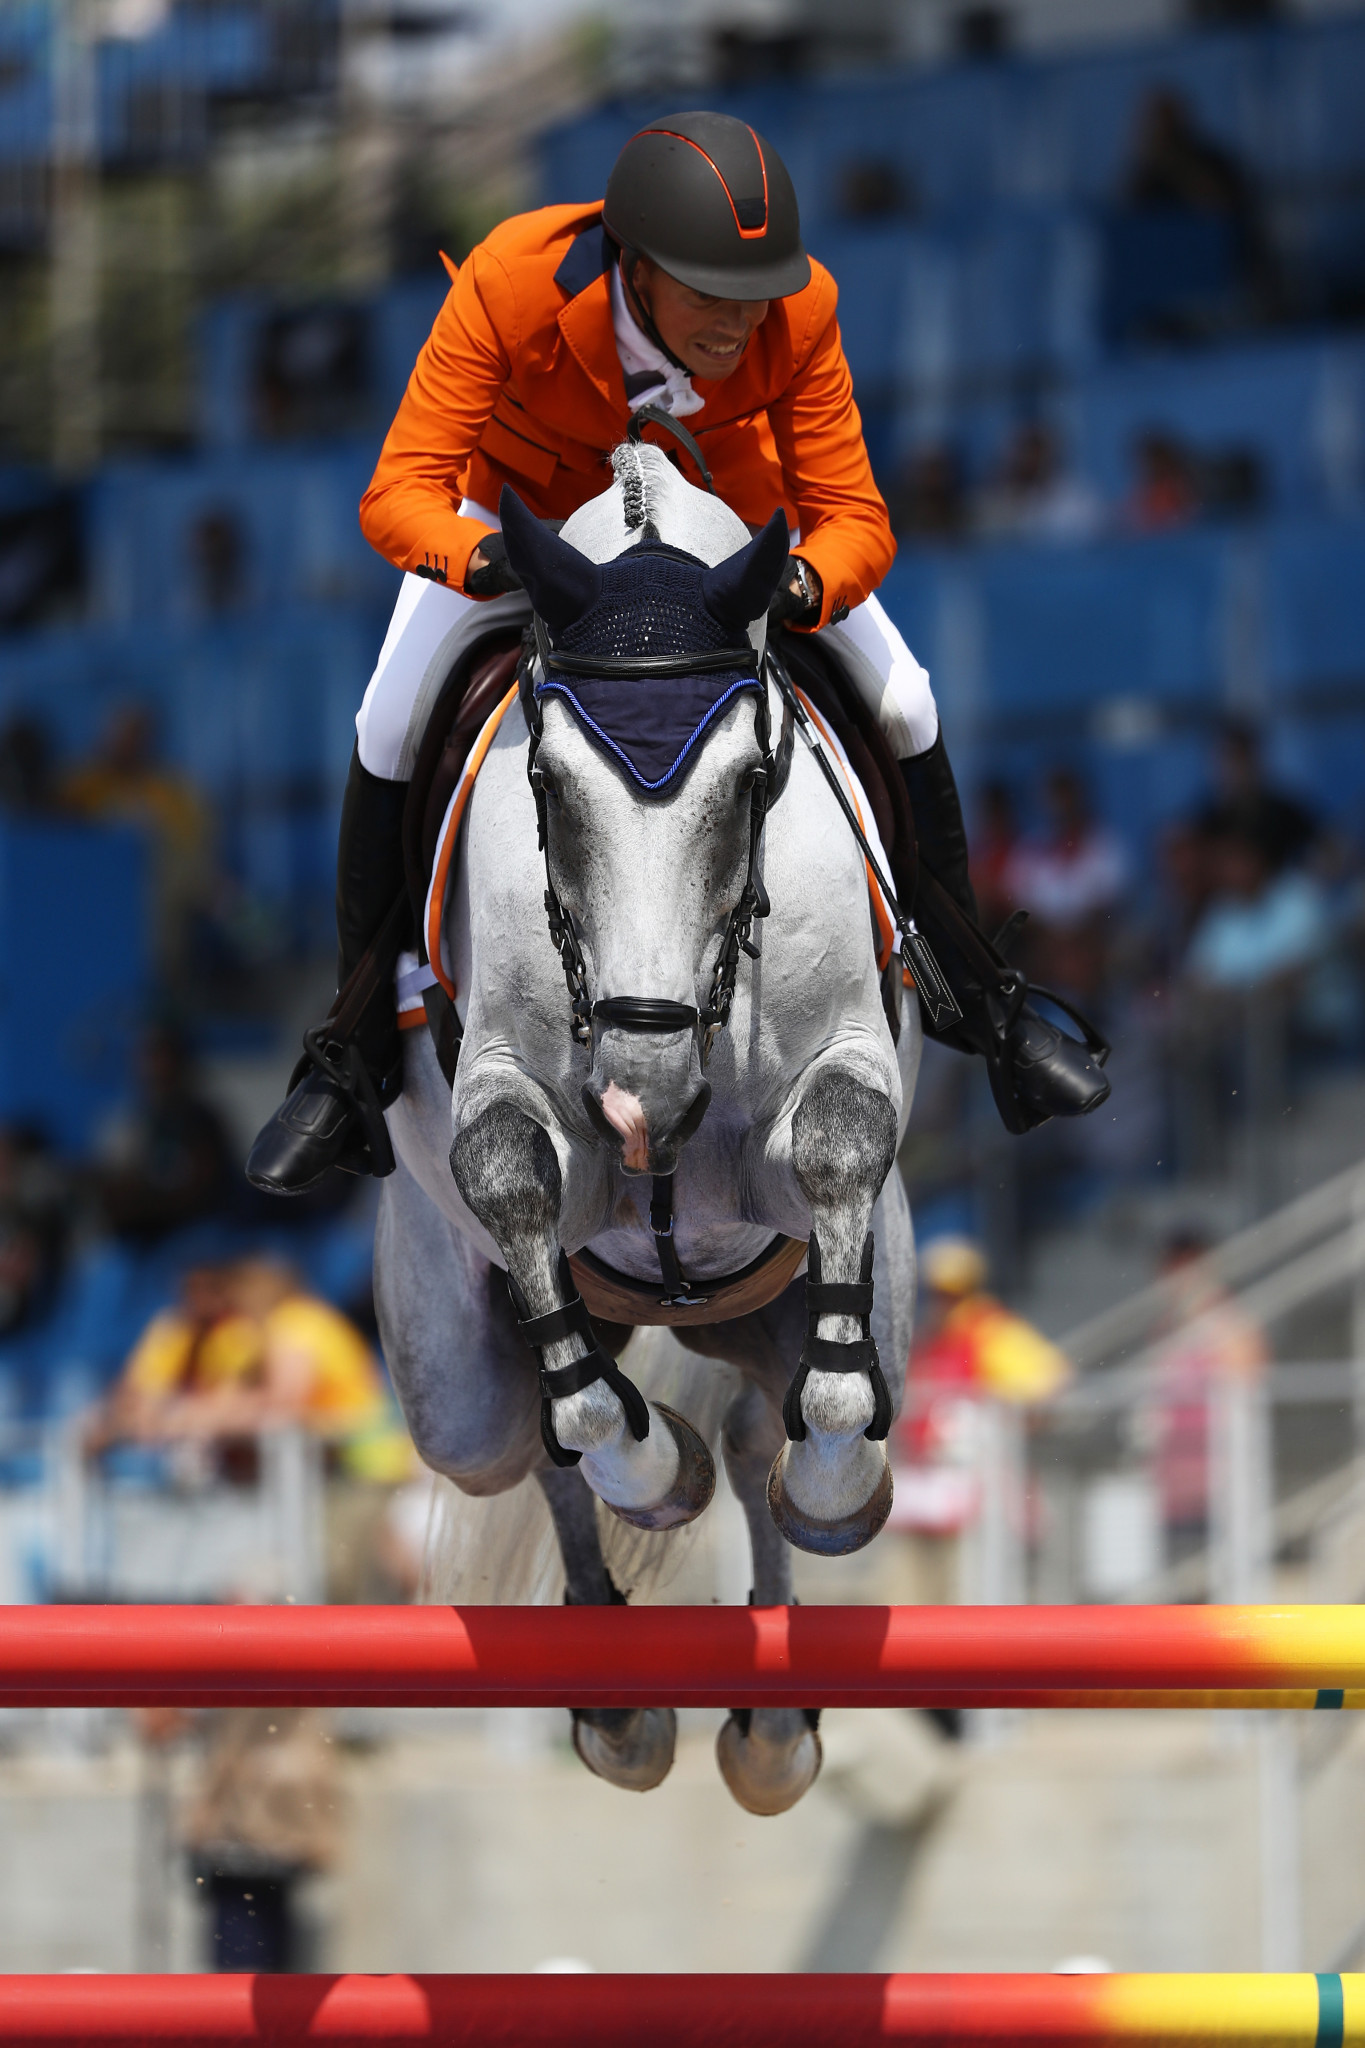 The Netherlands' Tim Lips has retained his place at the top of the individual standings ©Getty Images